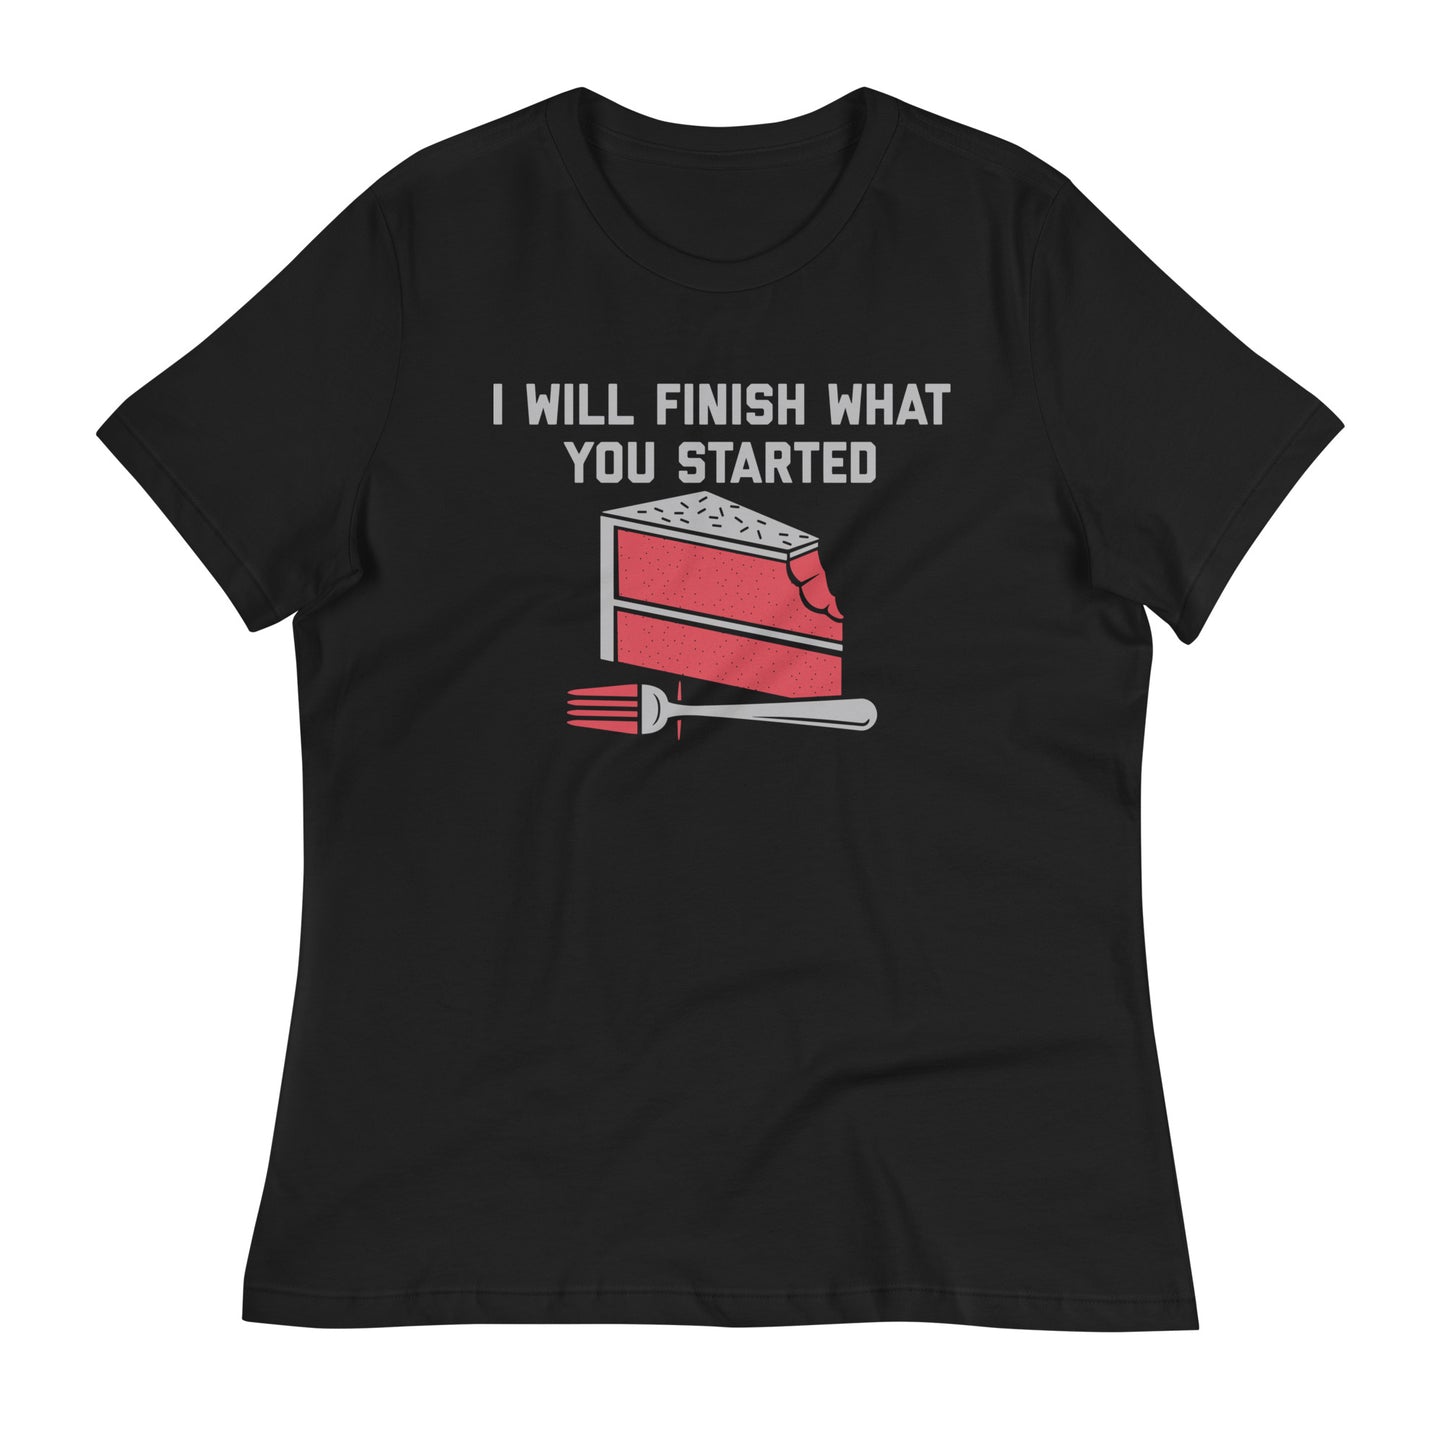 I Will Finish What You Started Women's Signature Tee